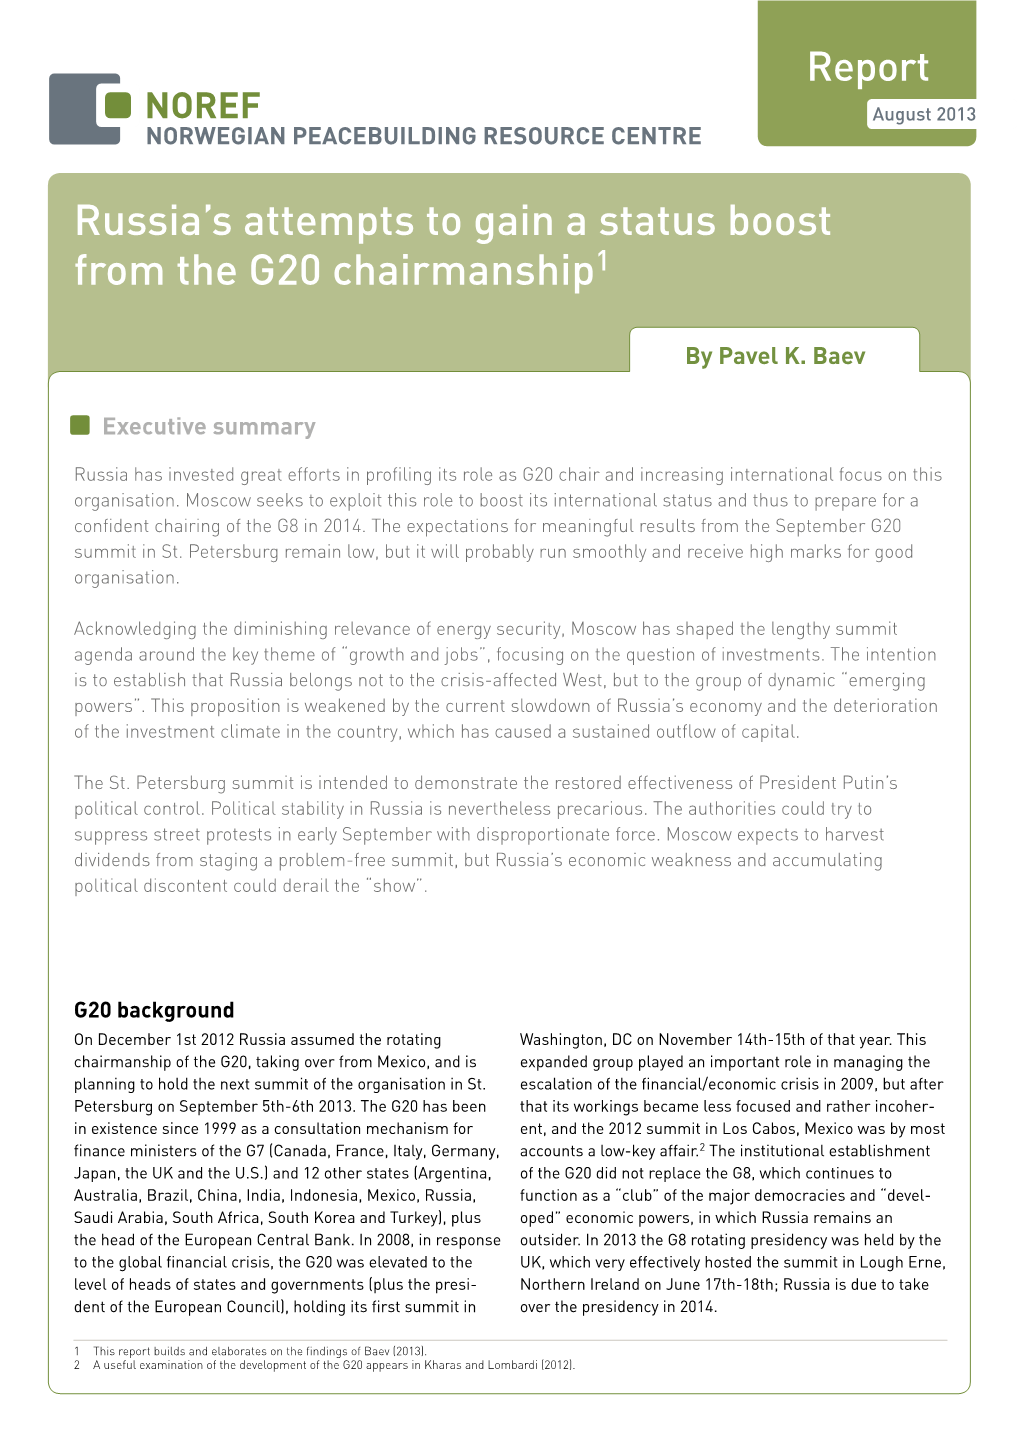 Russia's Attempts to Gain a Status Boost from the G20 Chairmanship